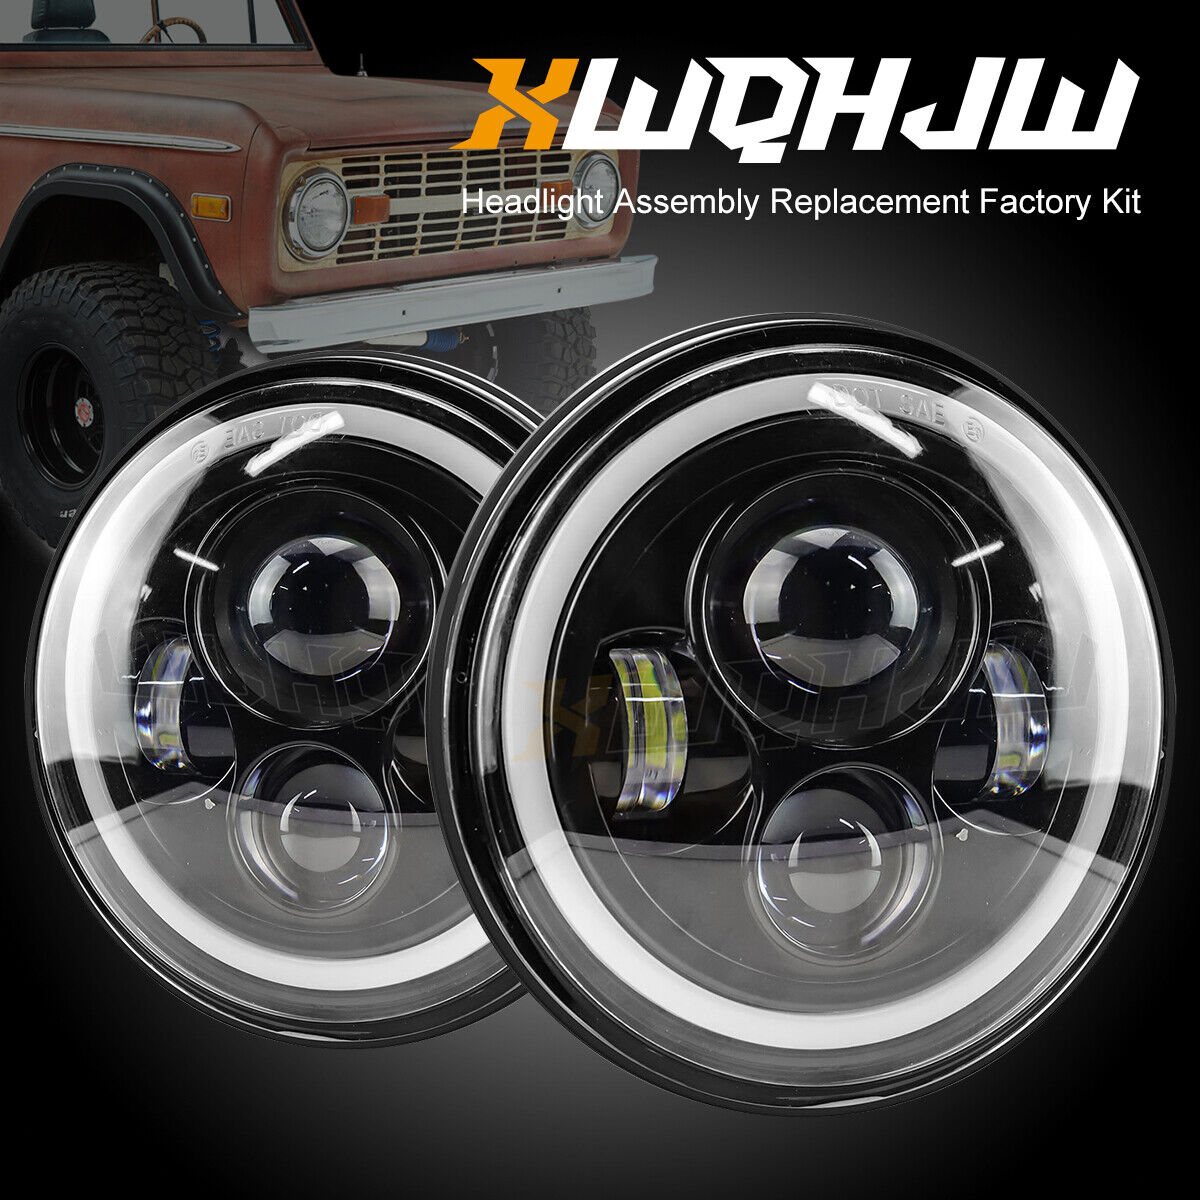 Pair 7 inch Round Hi/Lo Beam LED Headlights Chrome for 1966-1978 Ford Bronco